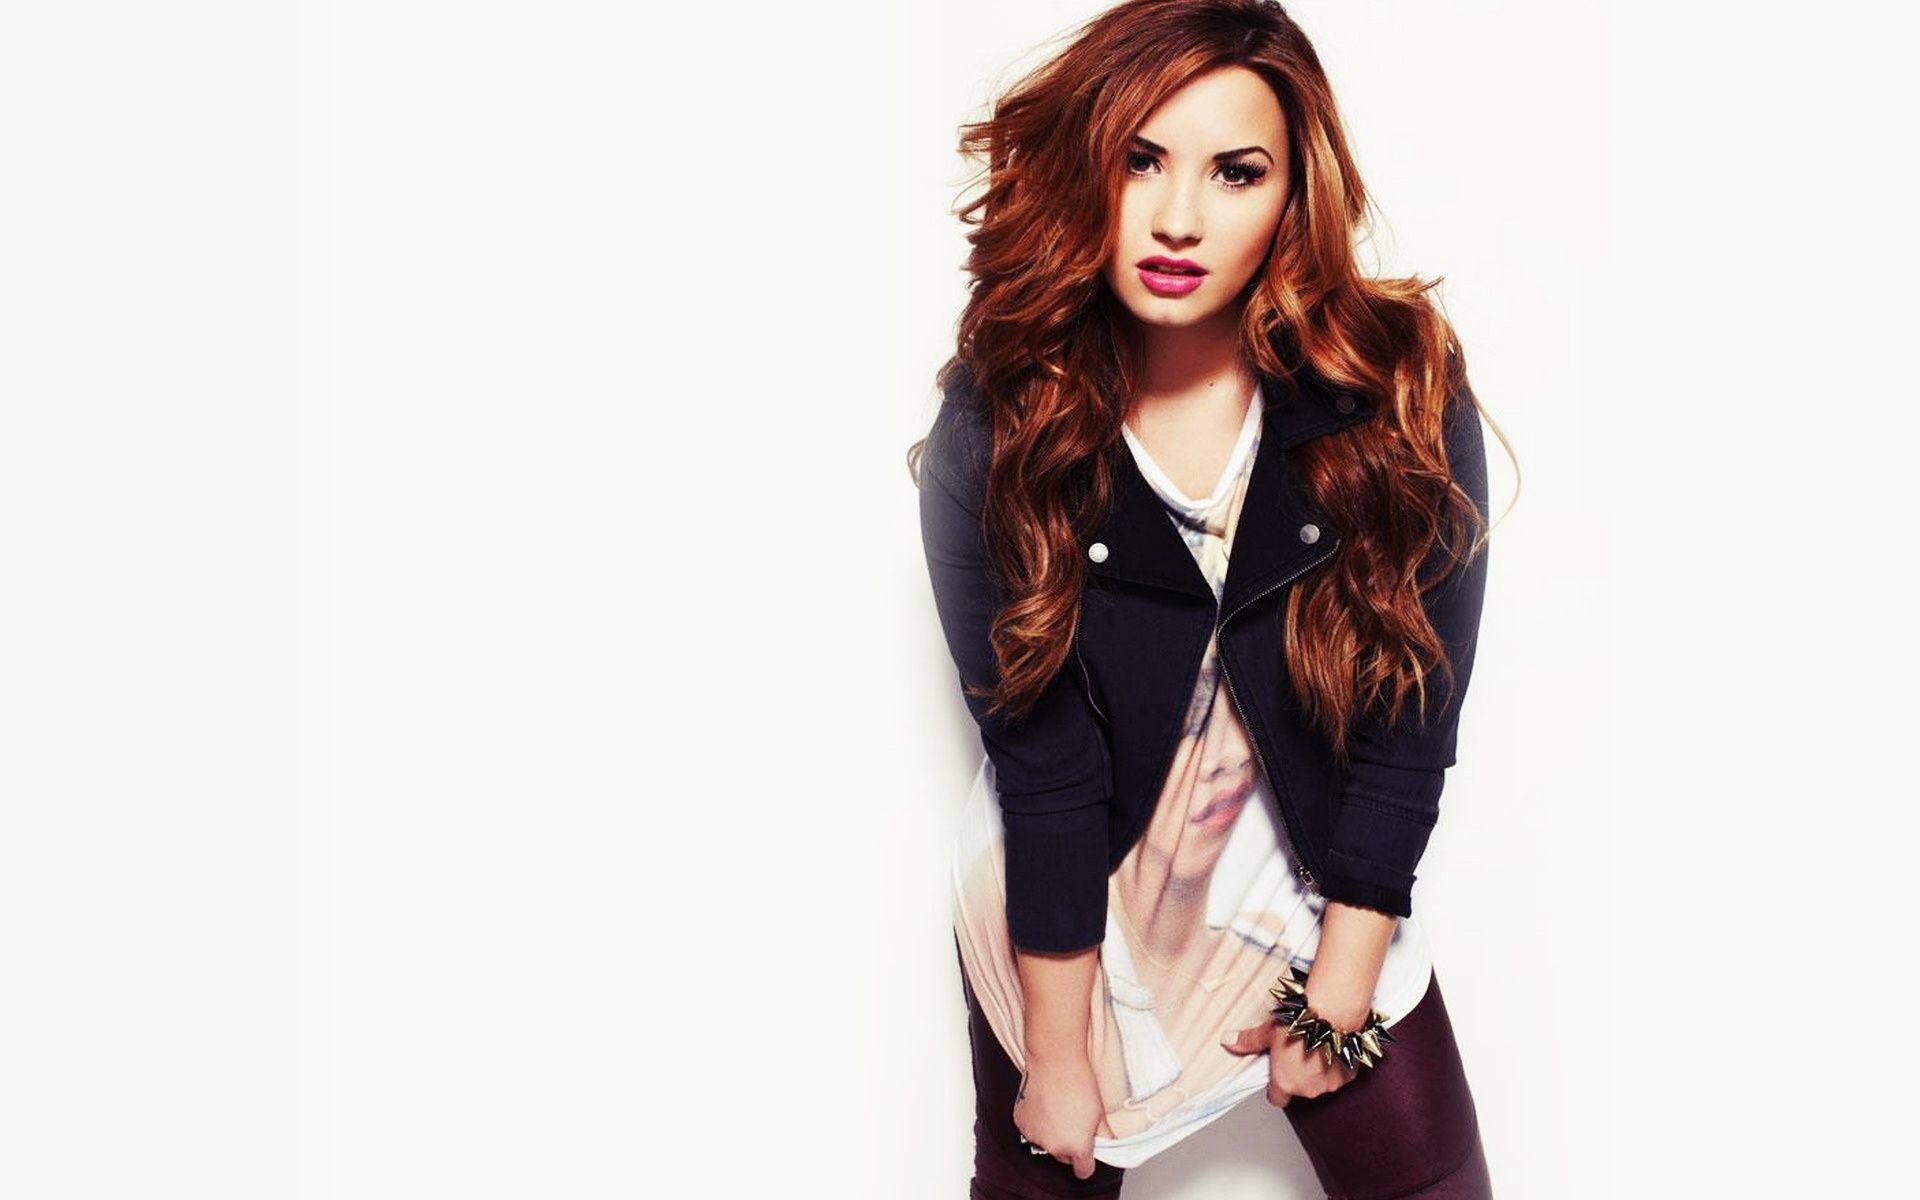 1920x1200 Demi Lovato Backgrounds Free Download.